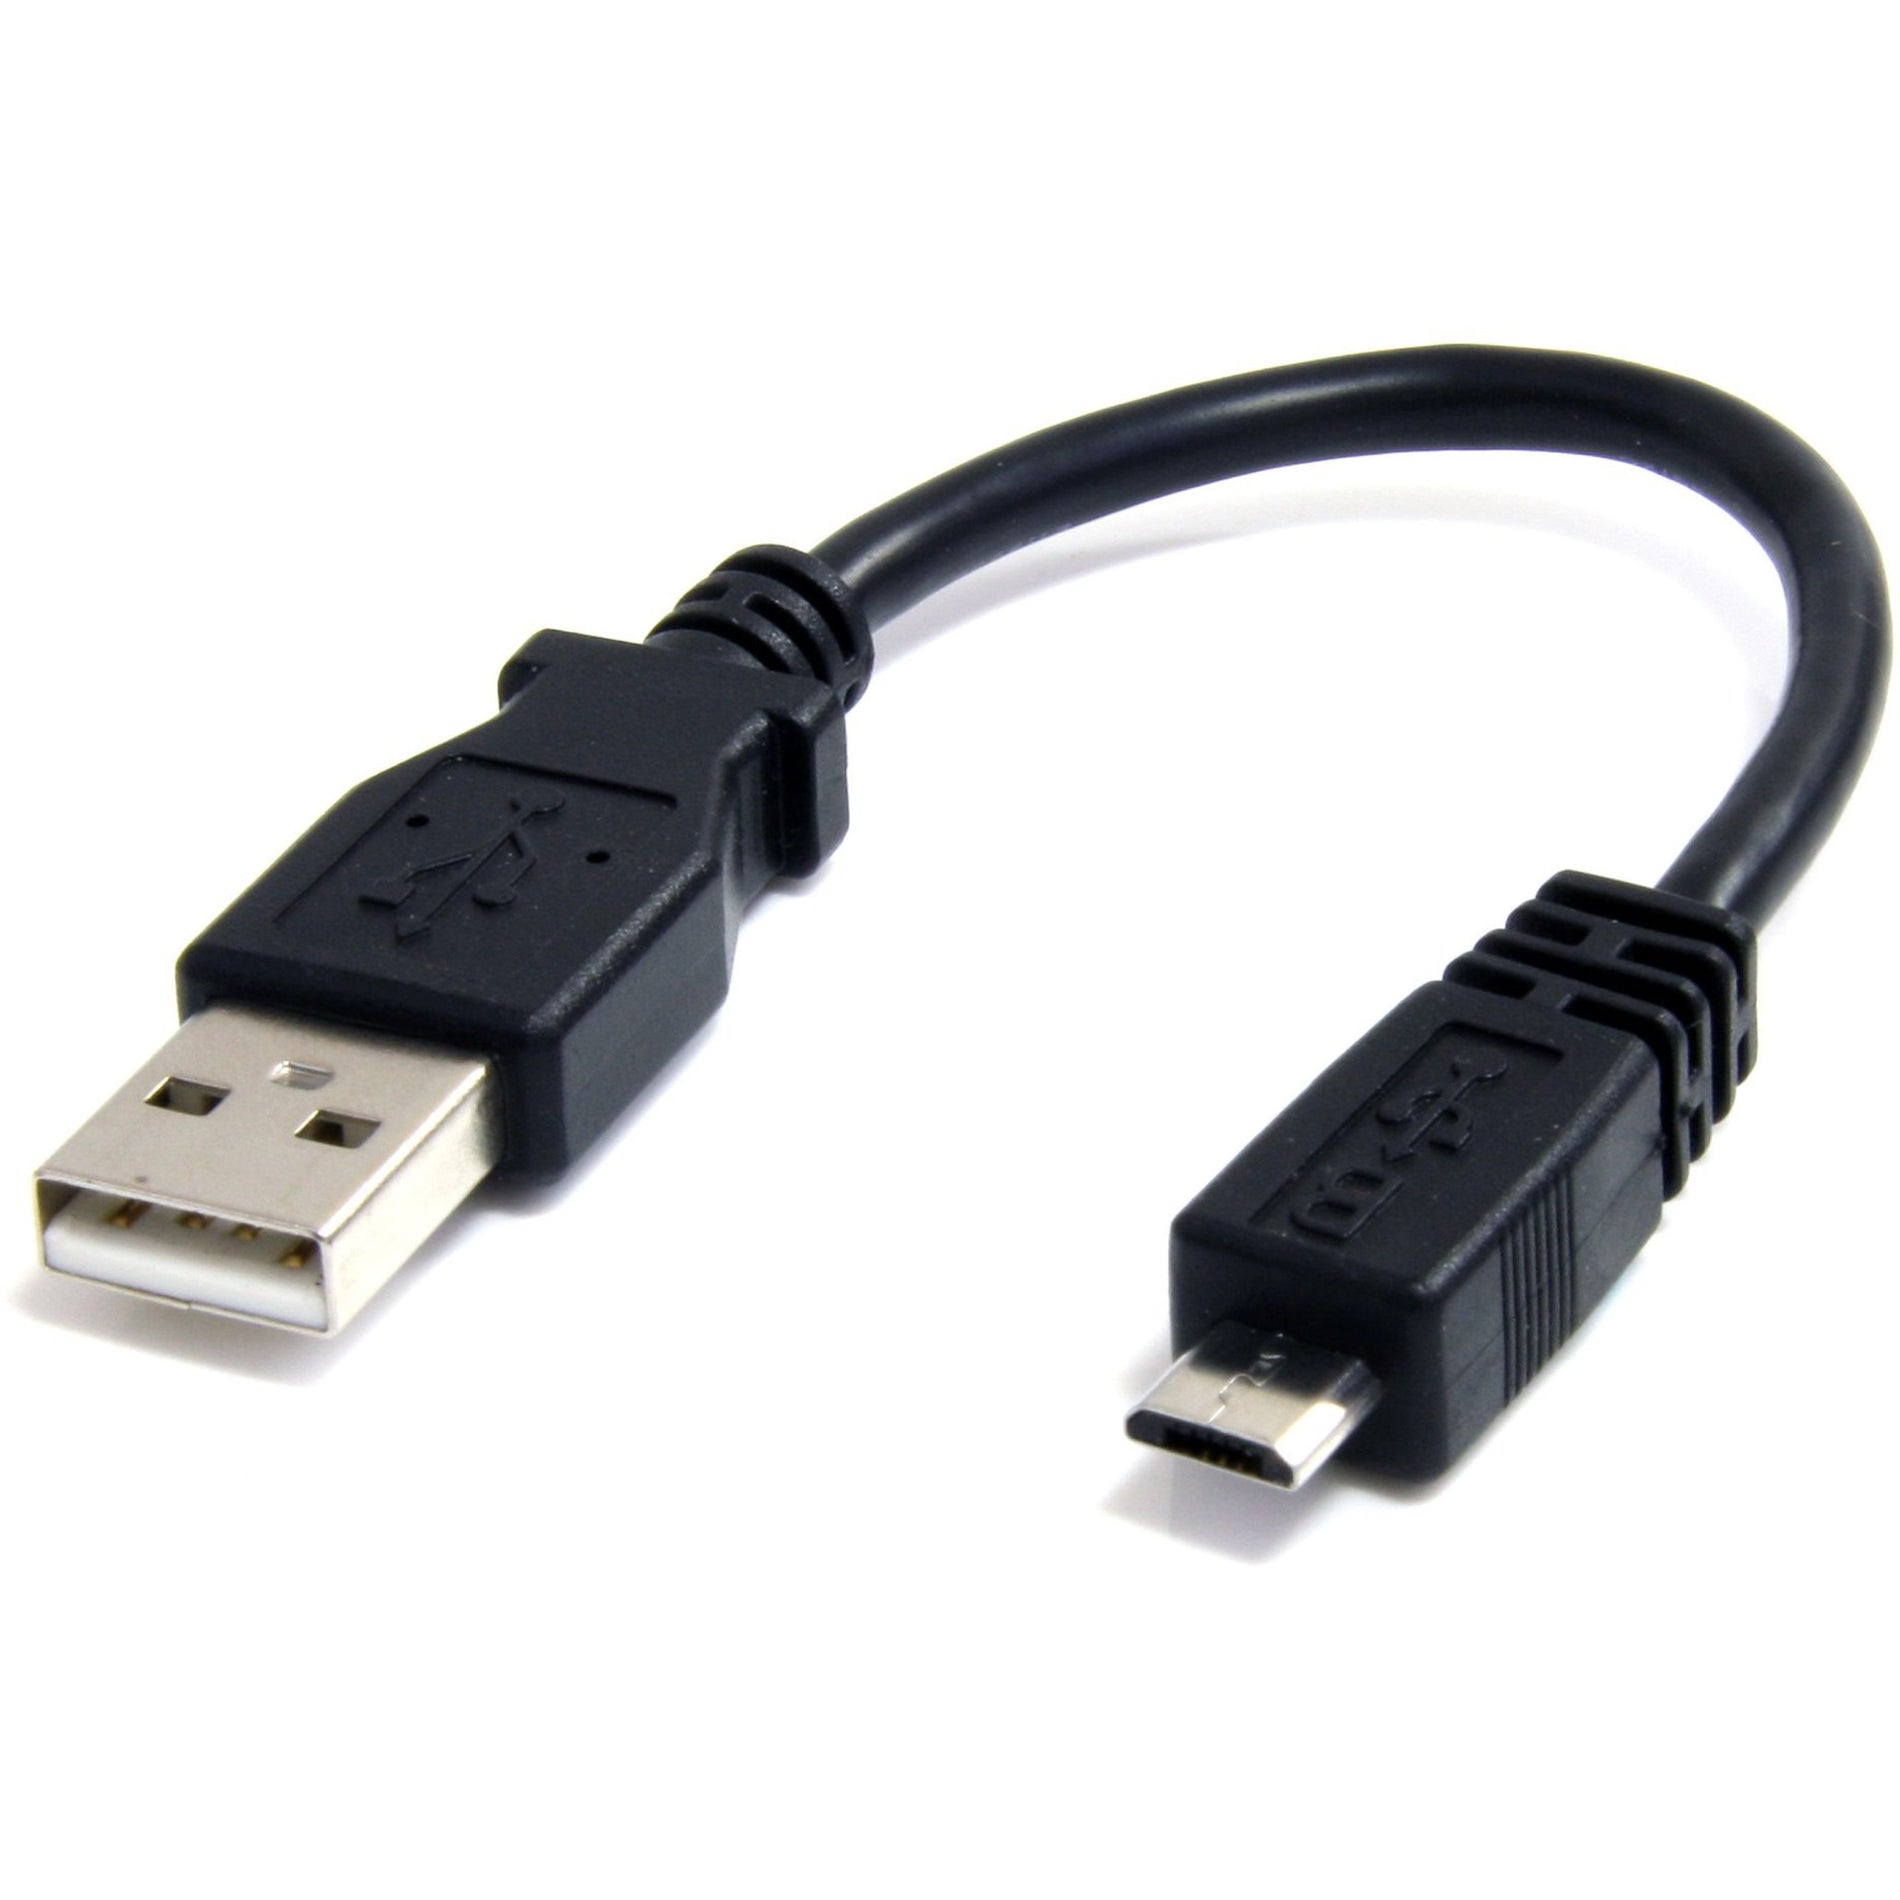 StarTech.com UUSBHAUB6IN 6in Micro USB Cable - A to Micro B, Fast Data Transfer, Lifetime Warranty